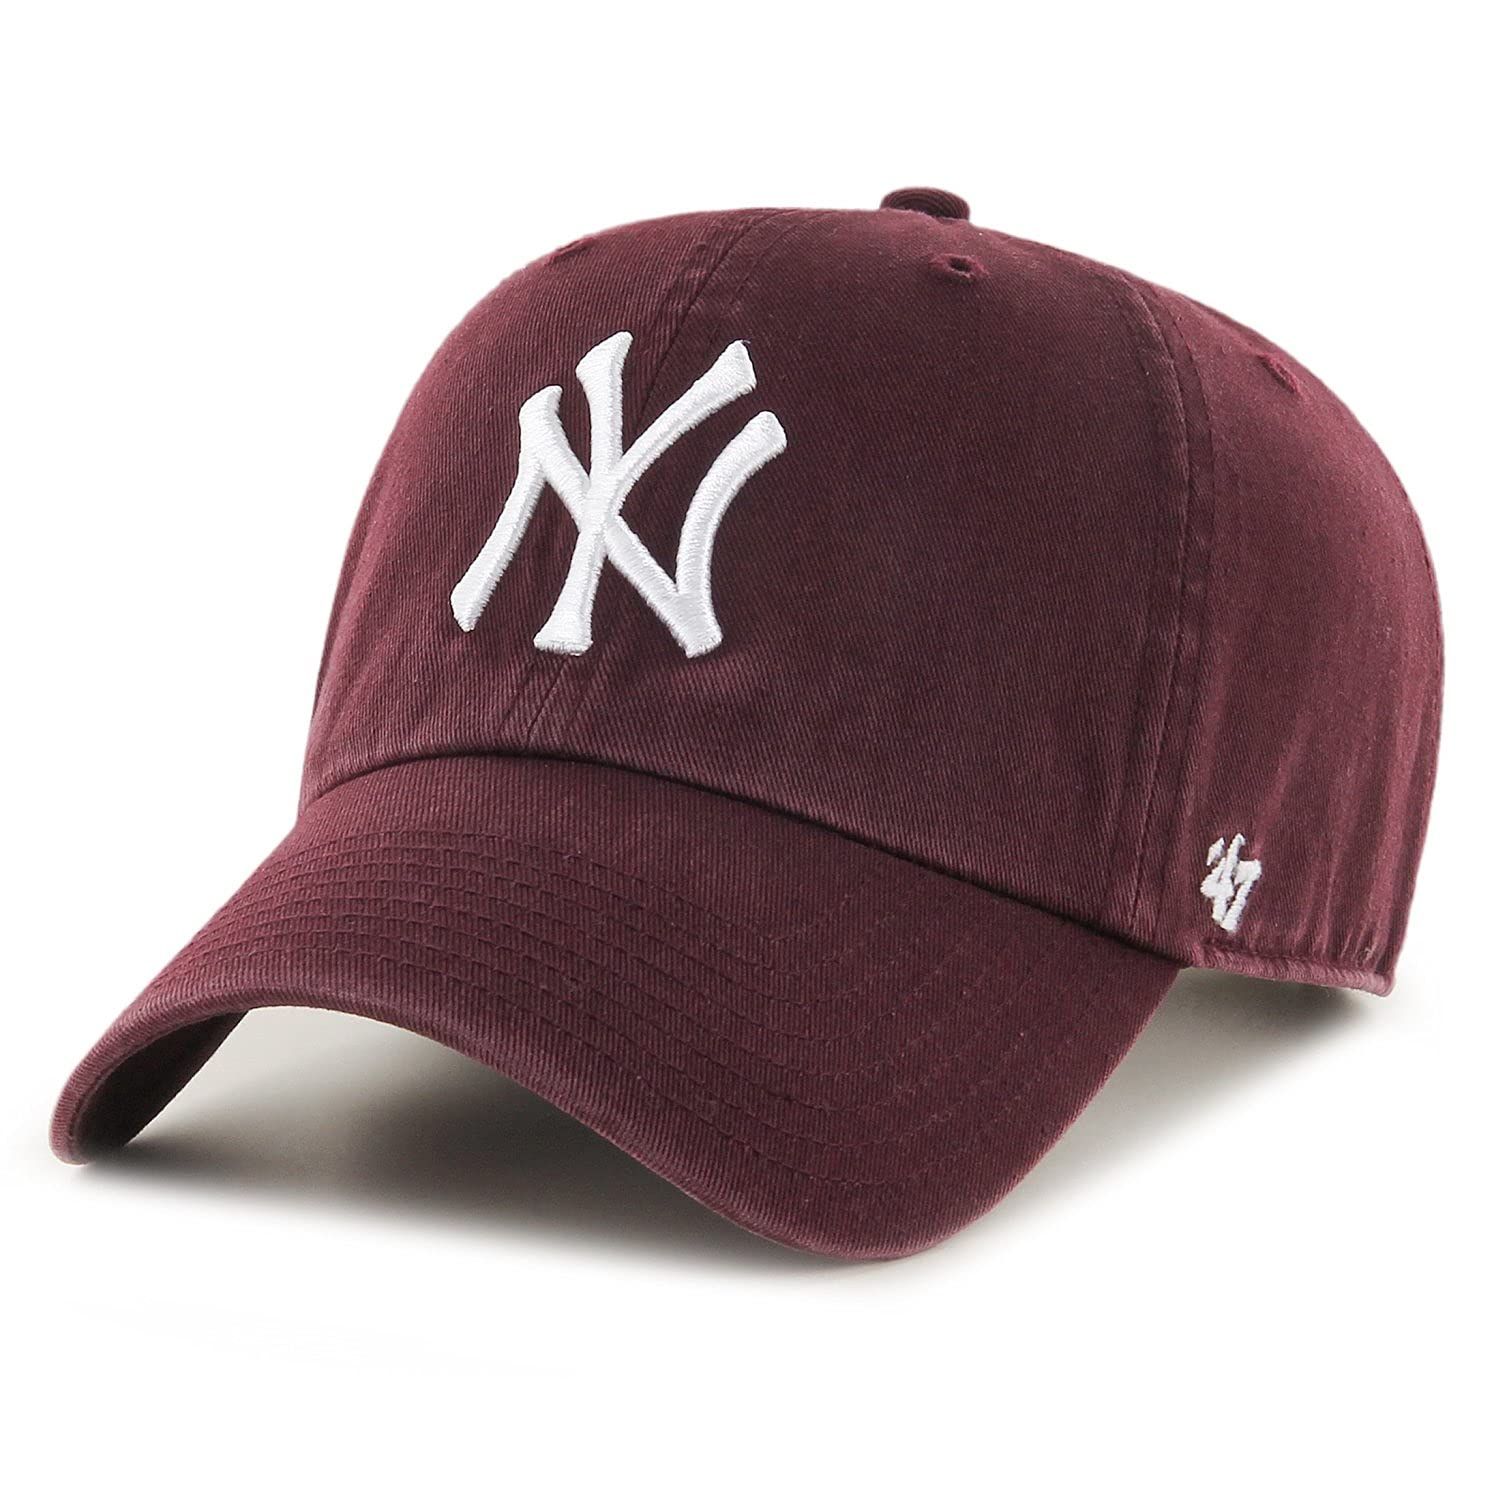 '47 NBA Clean Up Adjustable Hat, One Size | Amazon (US)